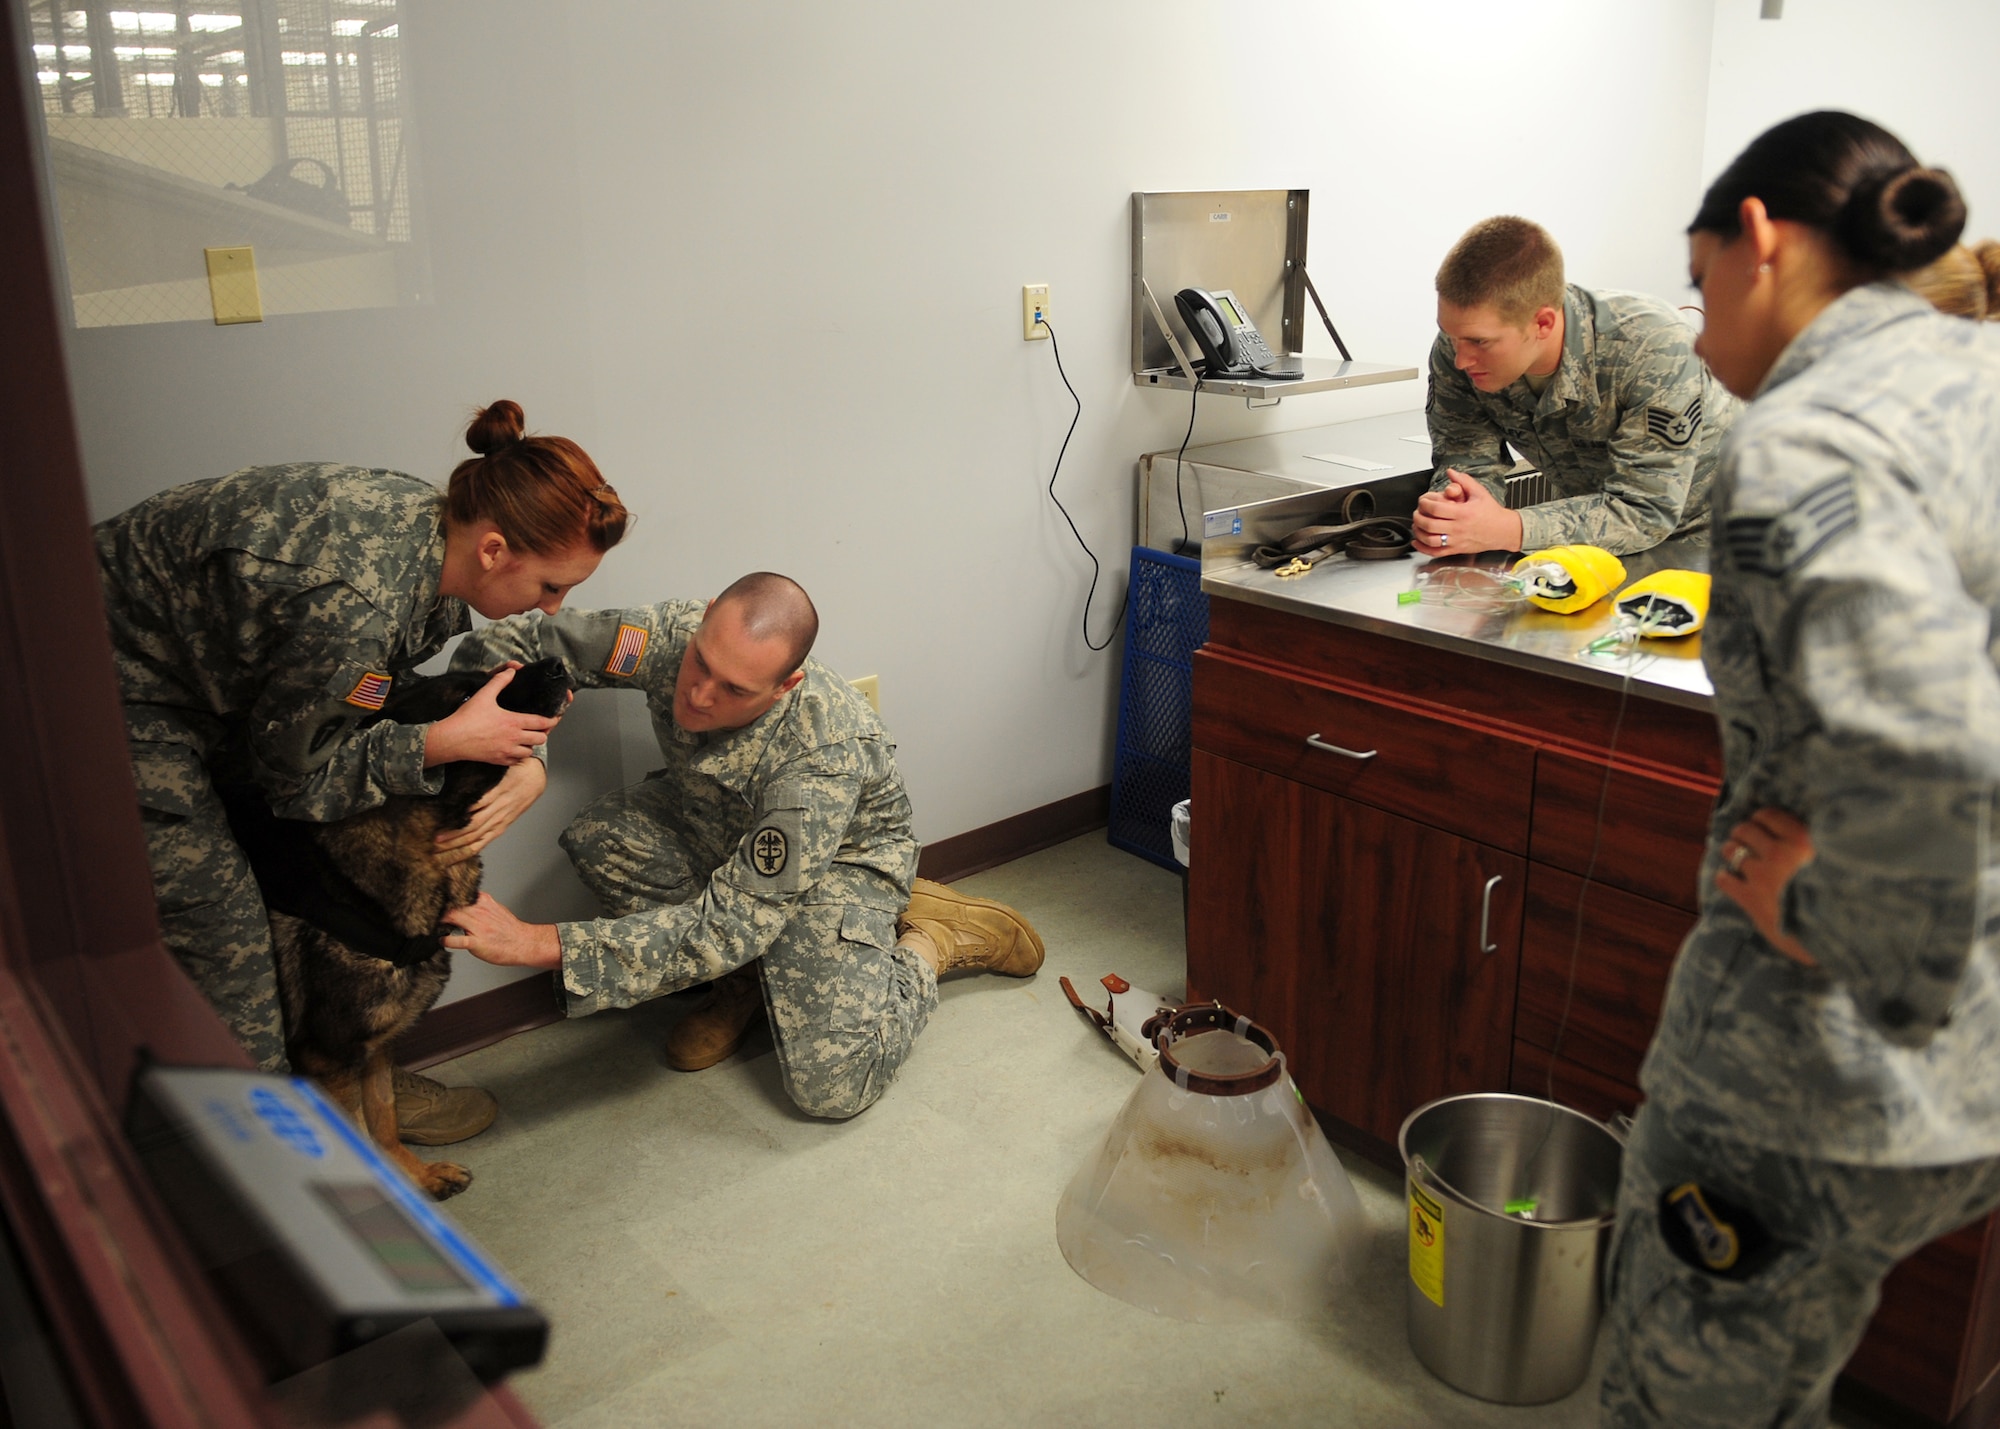 U.S. Army animal care specialists demonstrate a medical handling procedure to 9th Security Forces Squadron military working dog handlers at the Beale Air Force Base, Calif., kennels Nov. 29, 2012. The military working dog handlers train monthly with animal care specialist to learn techniques vital to combat readiness. (U.S. Air Force photo by Senior Airman Shawn Nickel/Released)